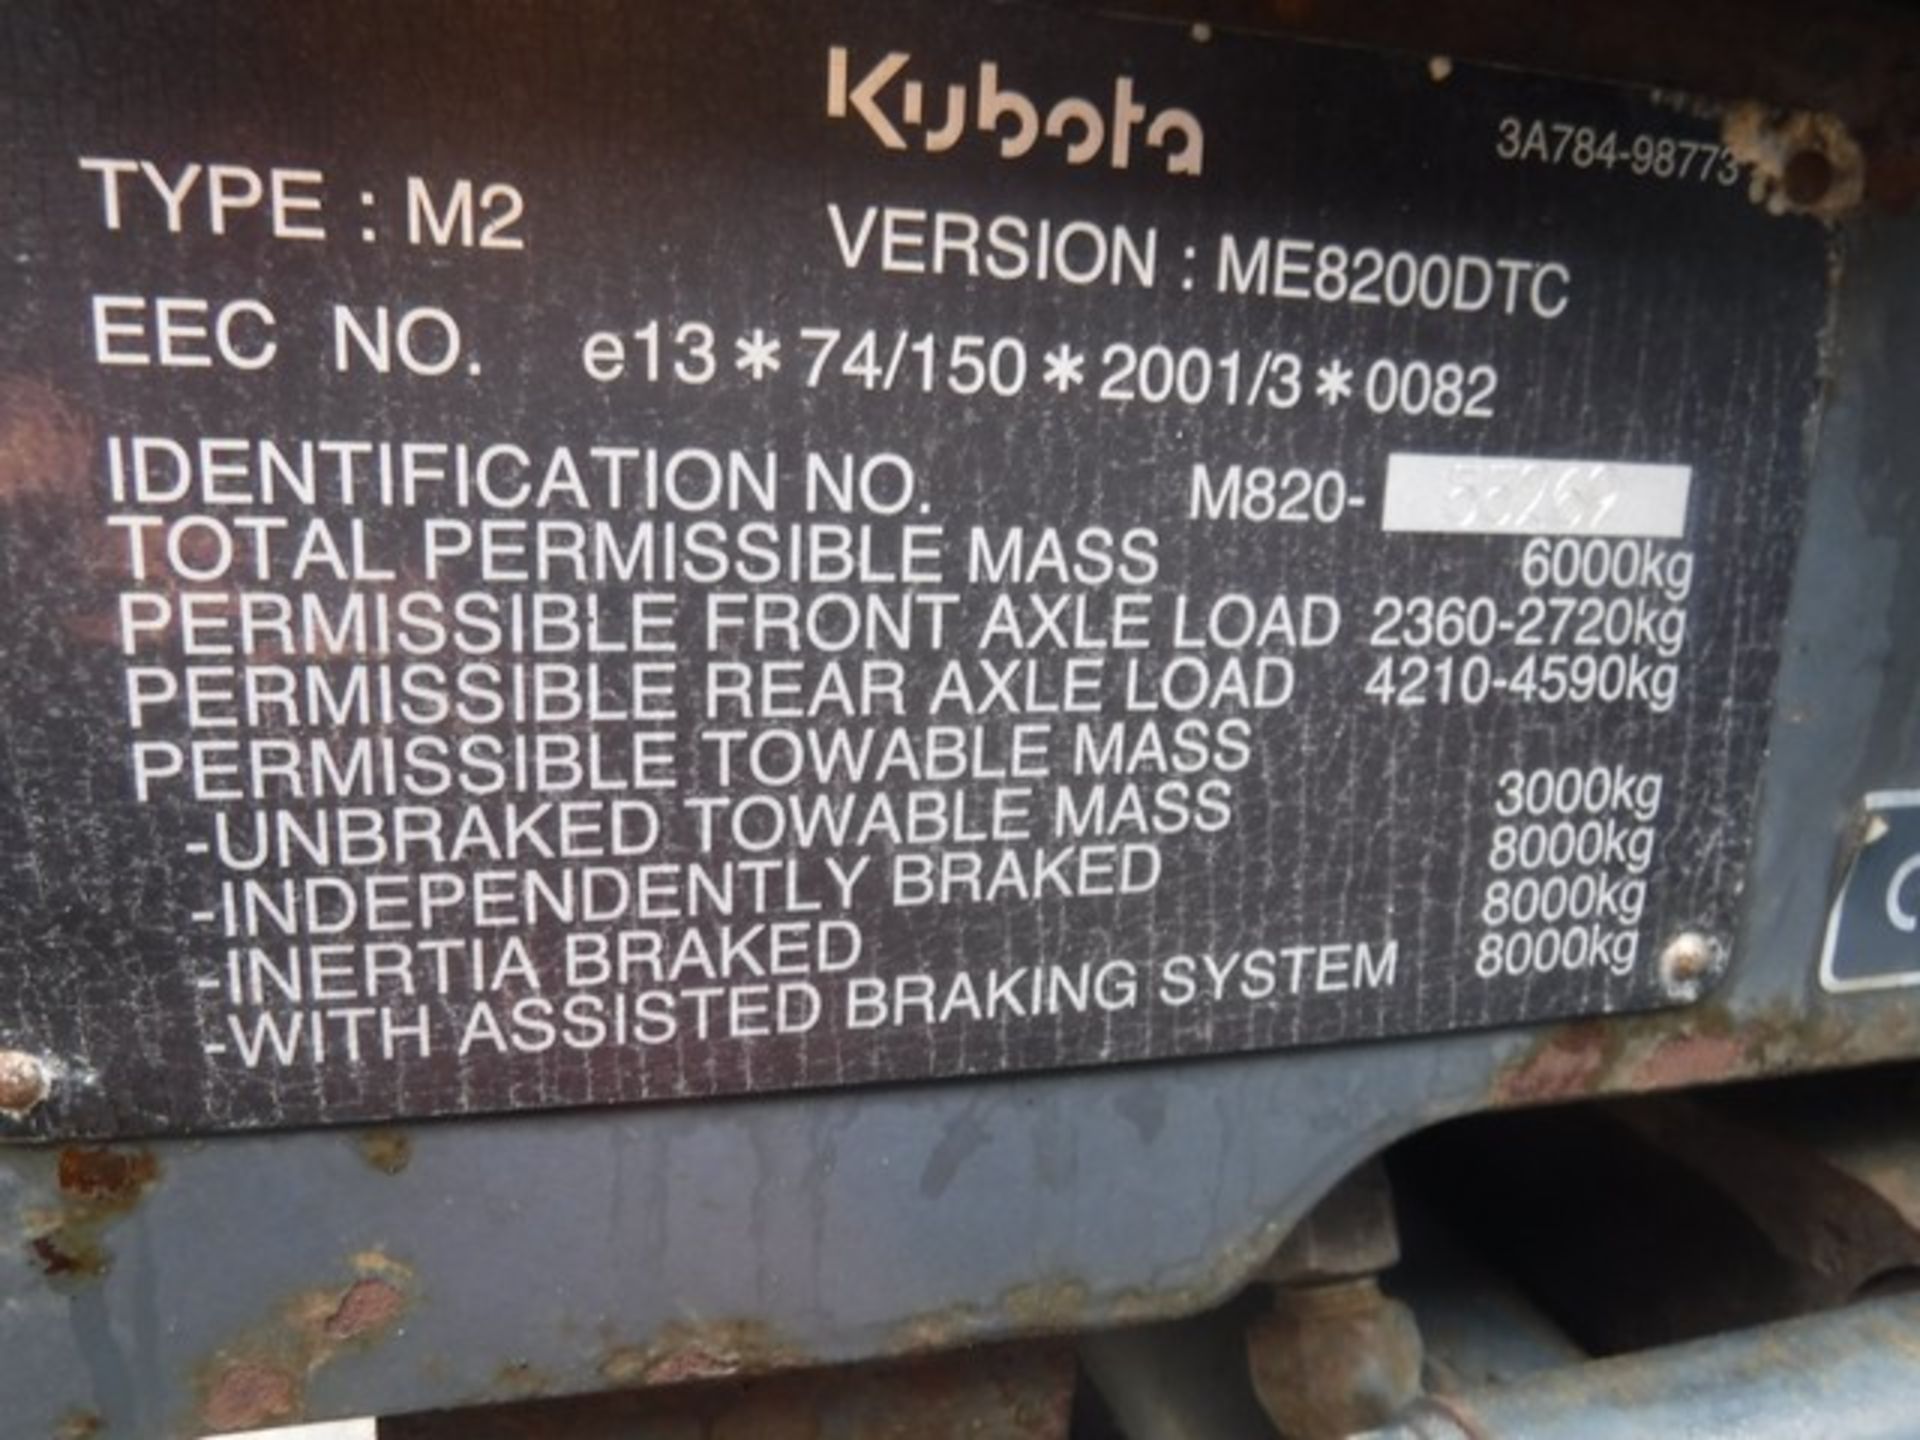 KUBOTA ME8200 tractor 8722 hrs (not verified) - Image 5 of 7